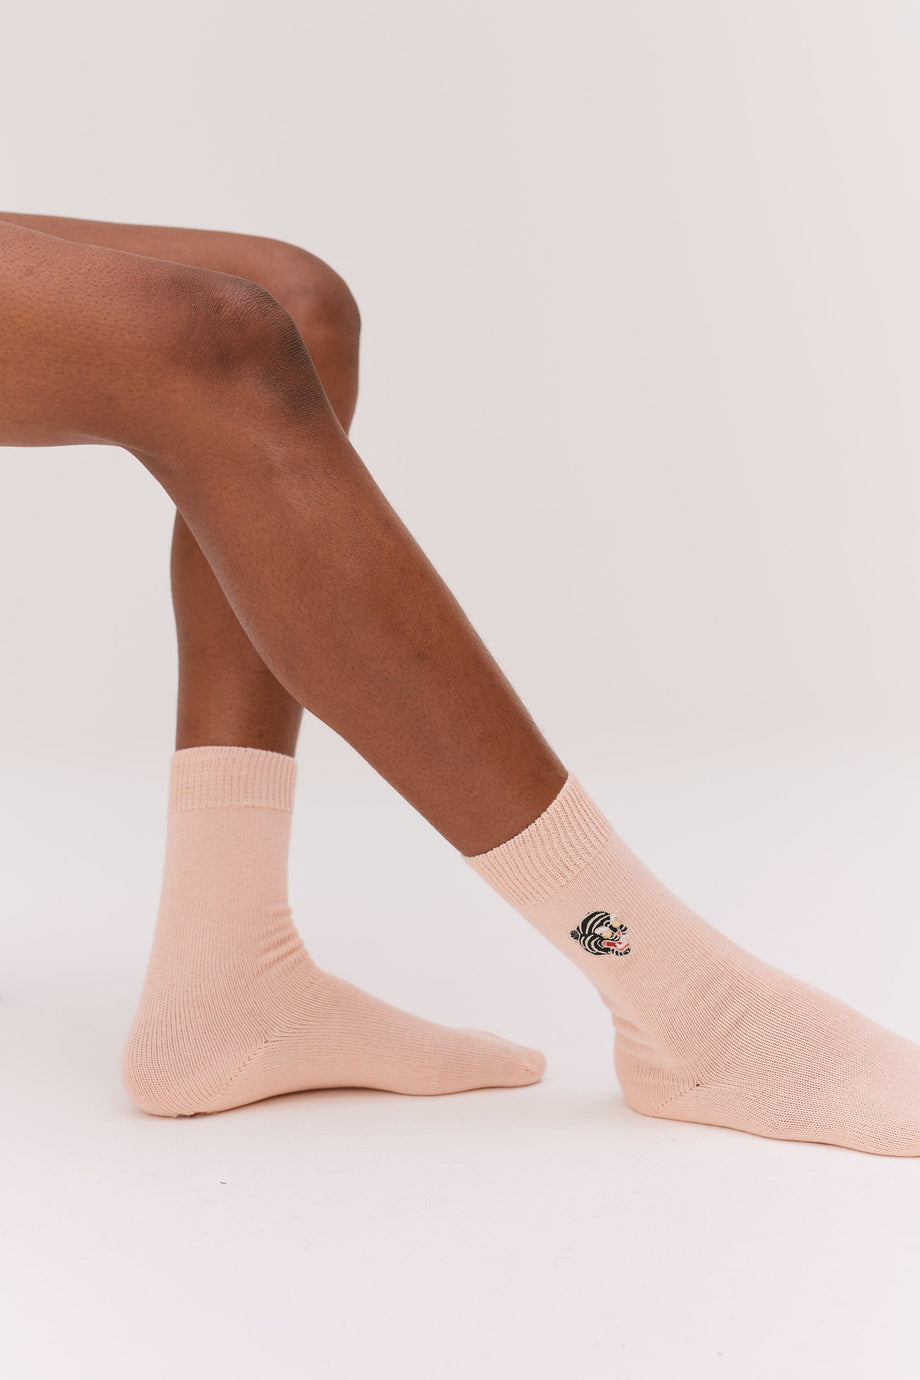 Women's Socks Tiger Embroidery Pink